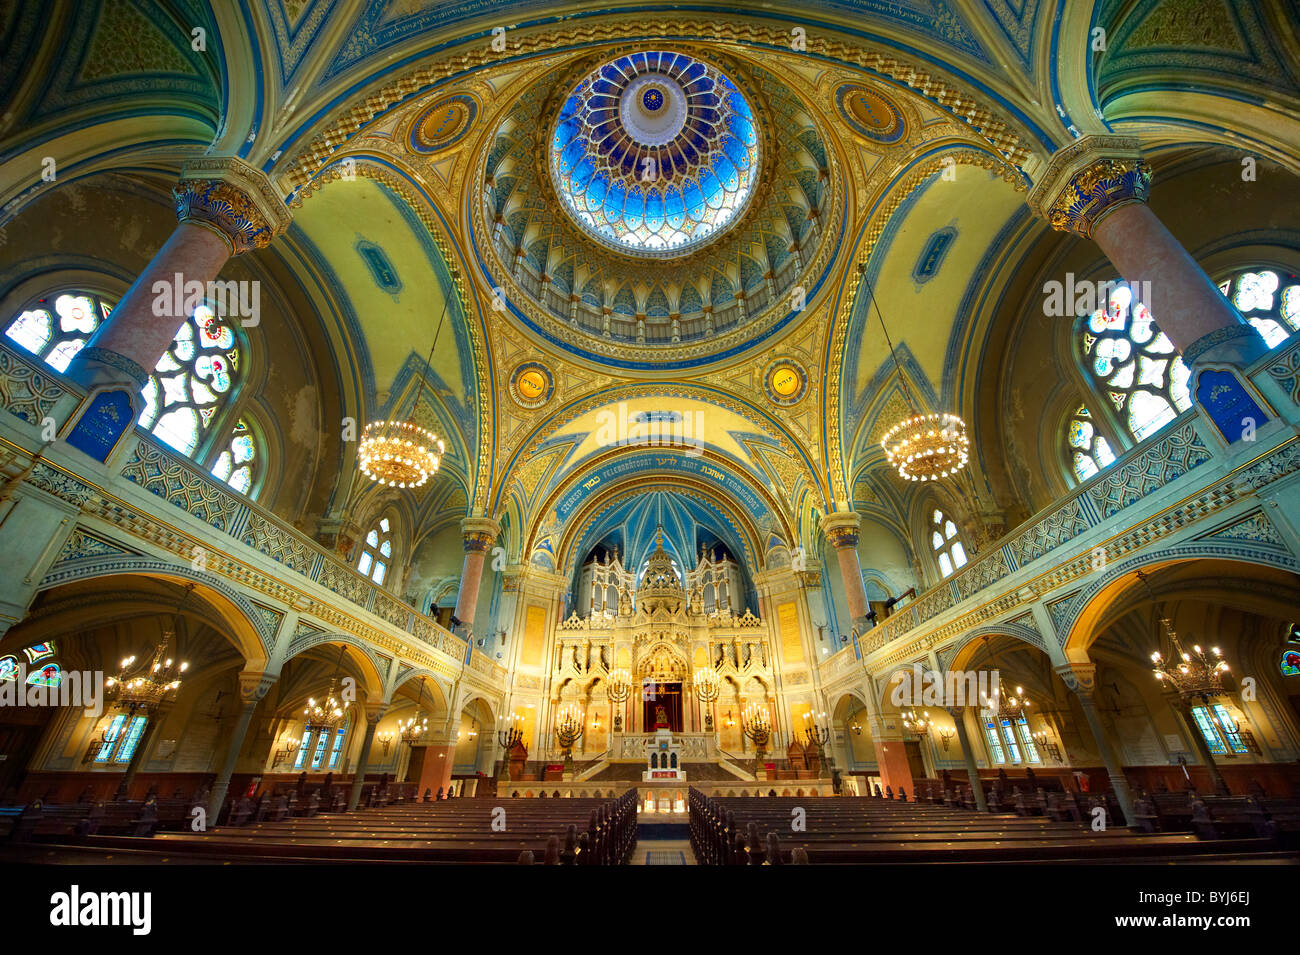 Interior of The Szeged Synagogue, Eclectic Style. Hungary Stock Photo